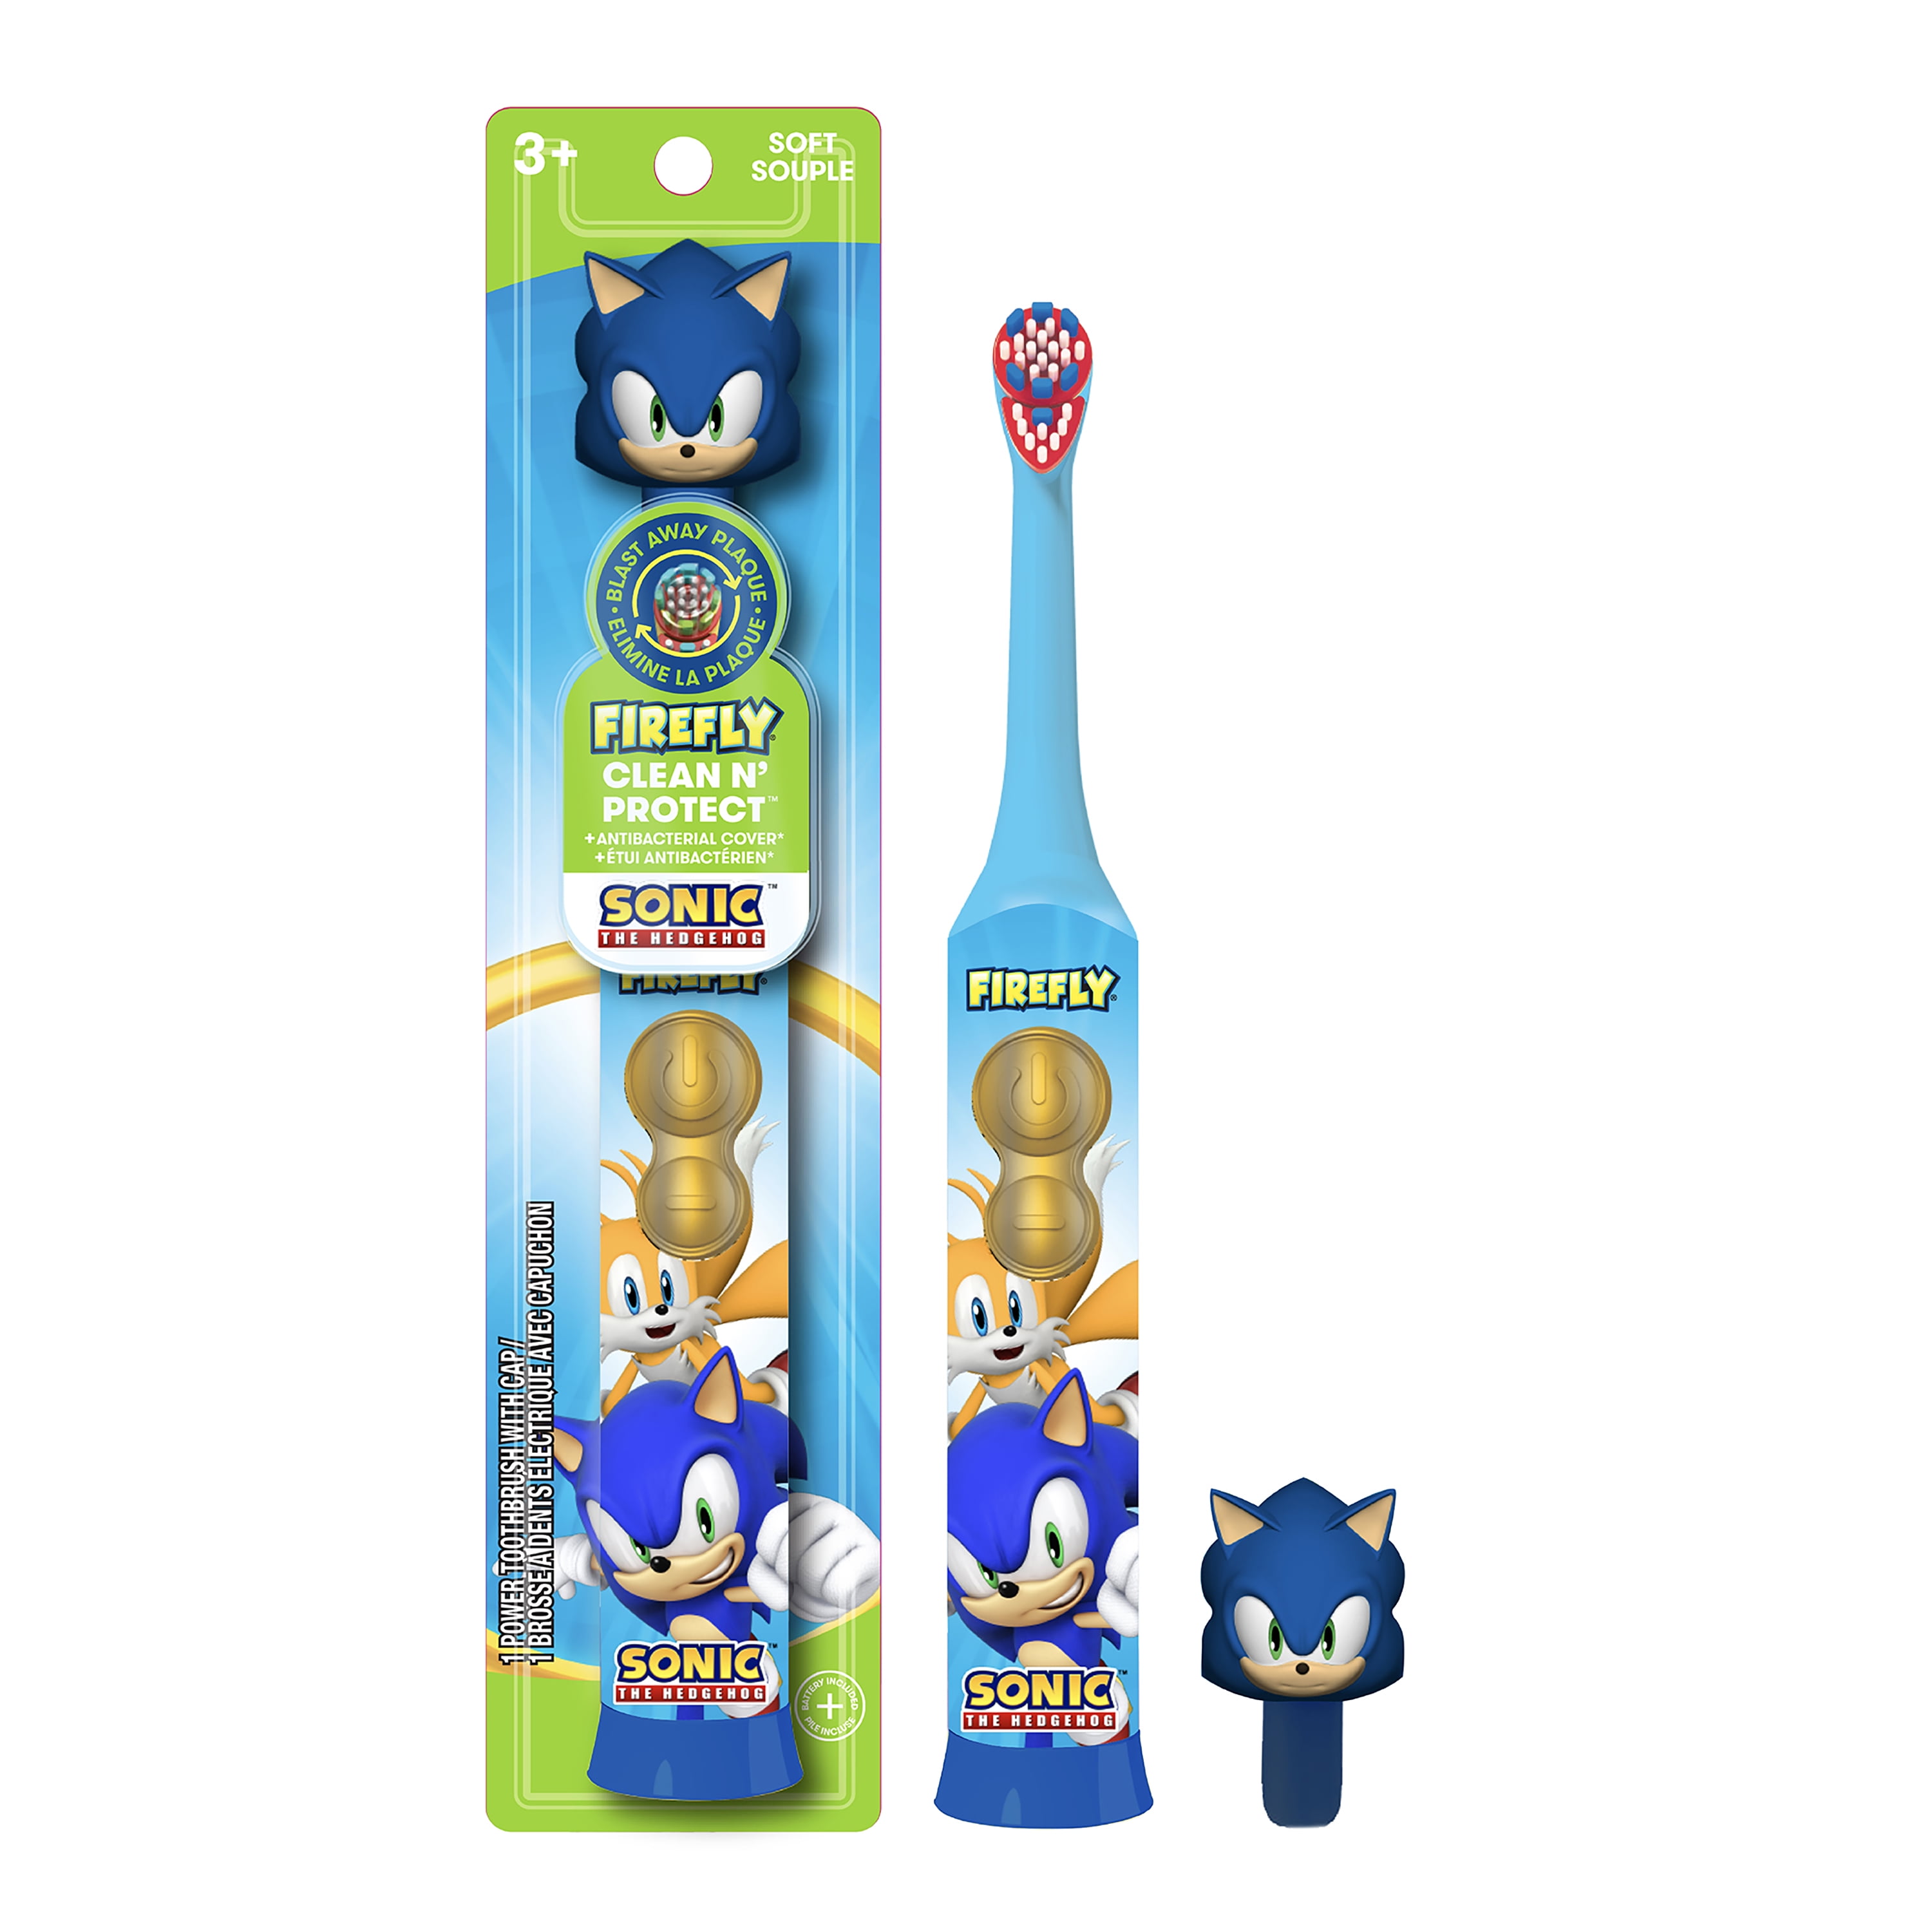  FIREFLY Play Action Sonic The Hedgehog - Kit de